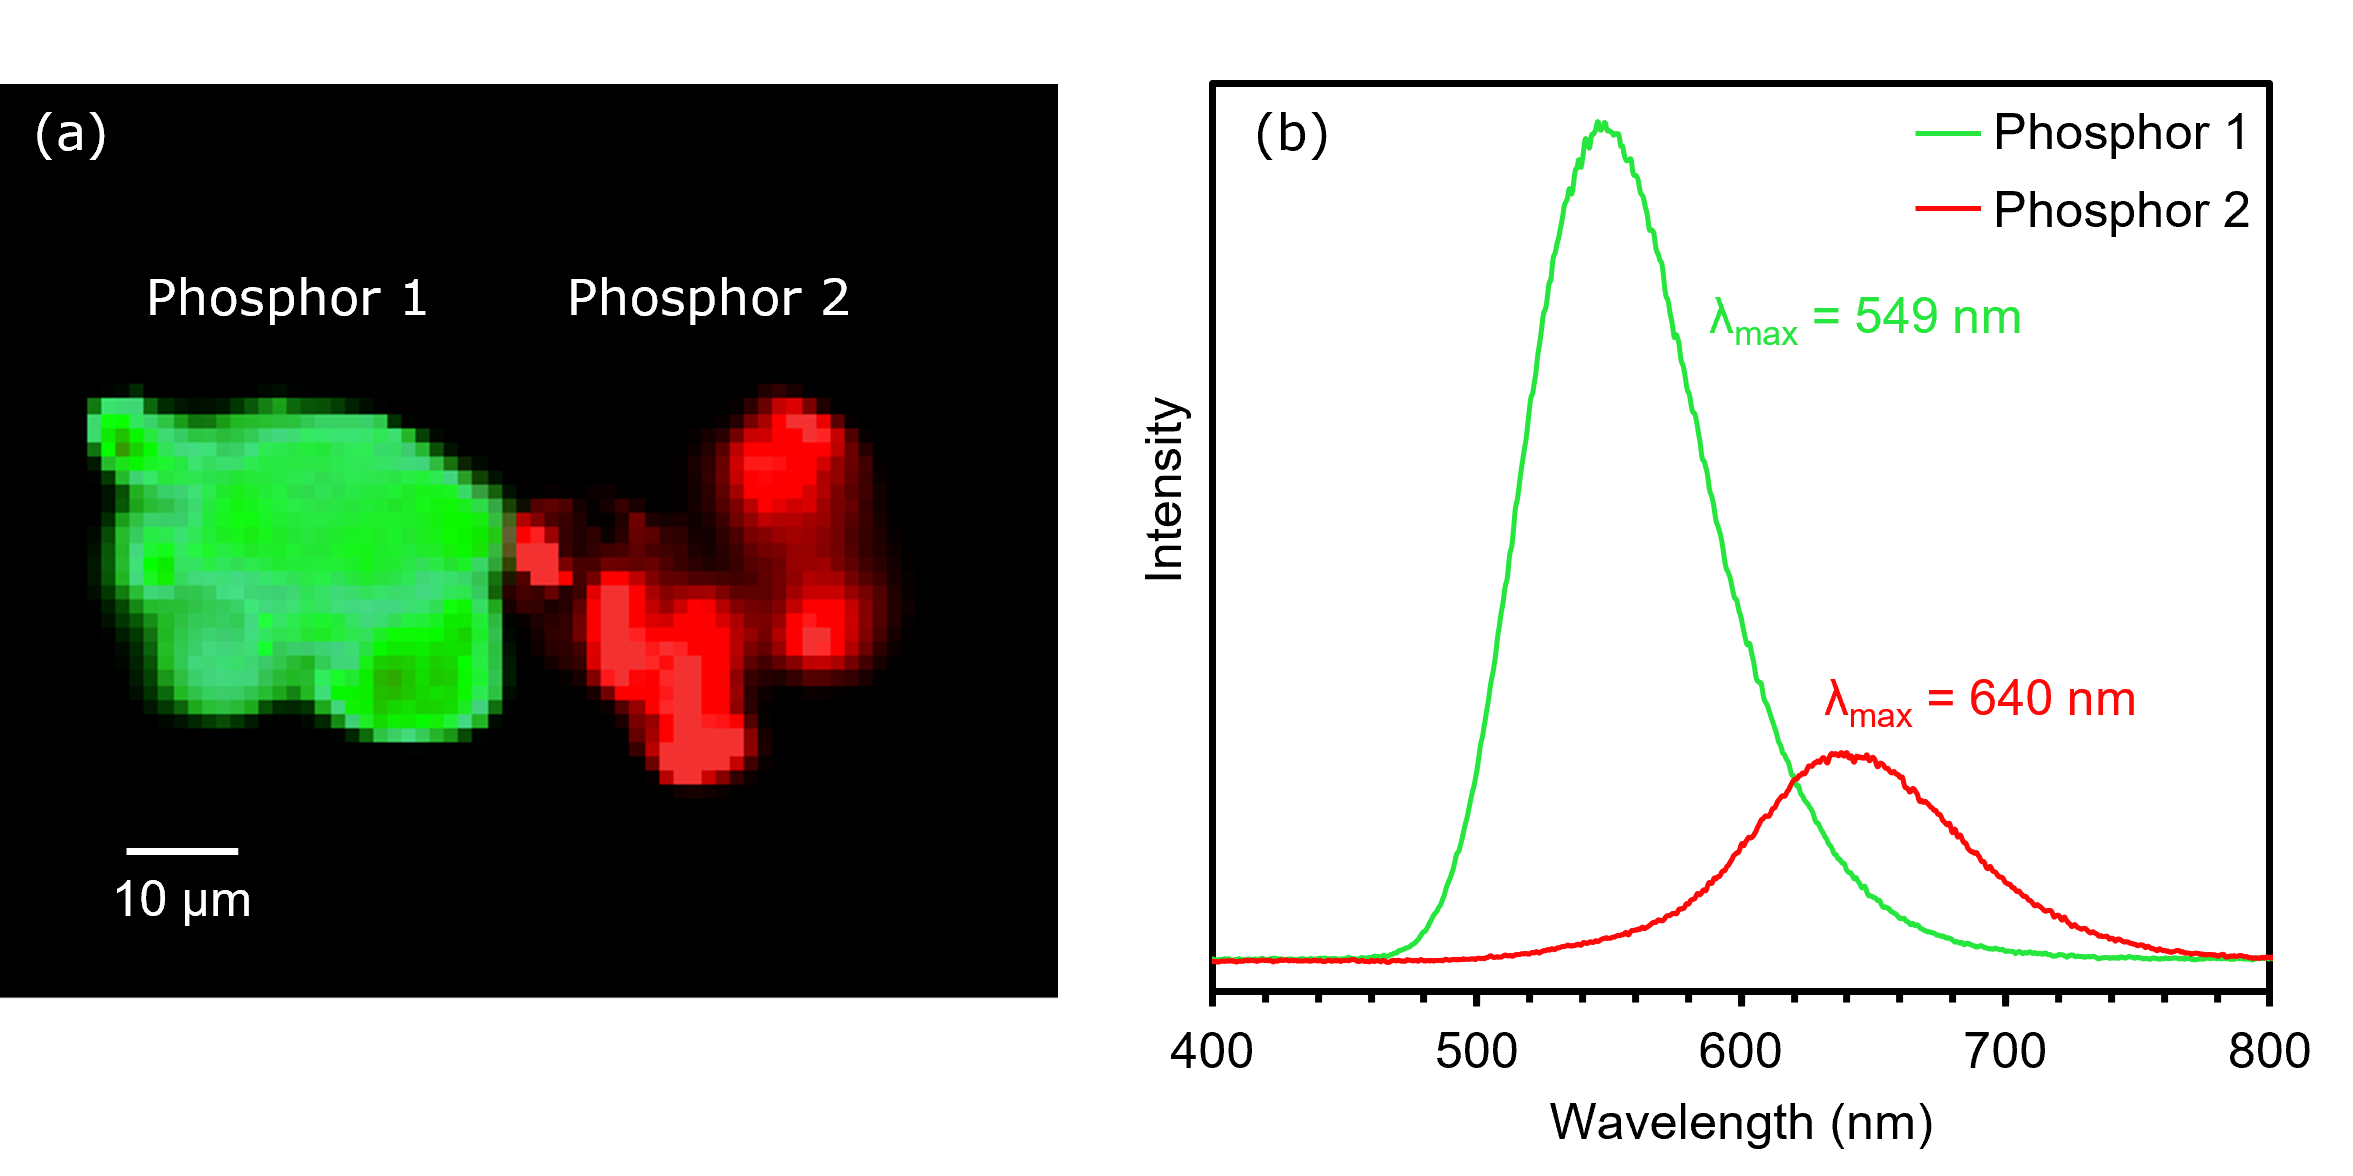 PL image and spectra of phosphors 1 and 2